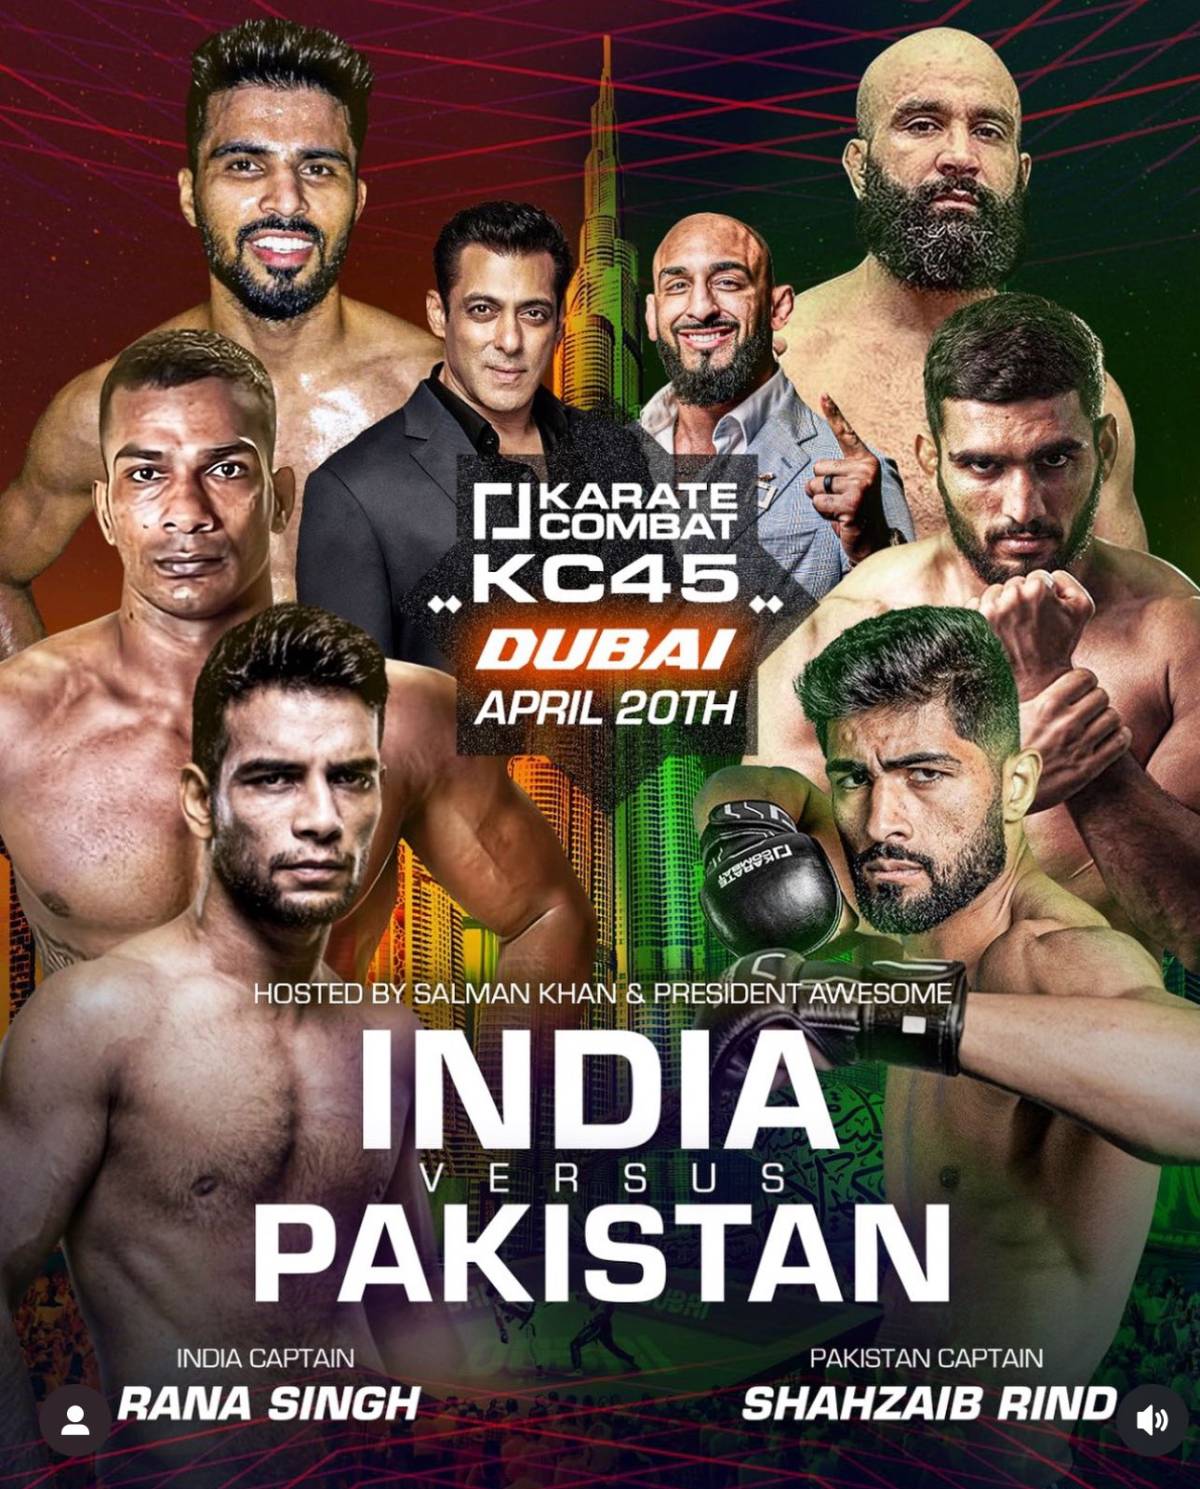 Tension escalates between Pakistan and India players in karate rivalry ahead of the Combat 45 event